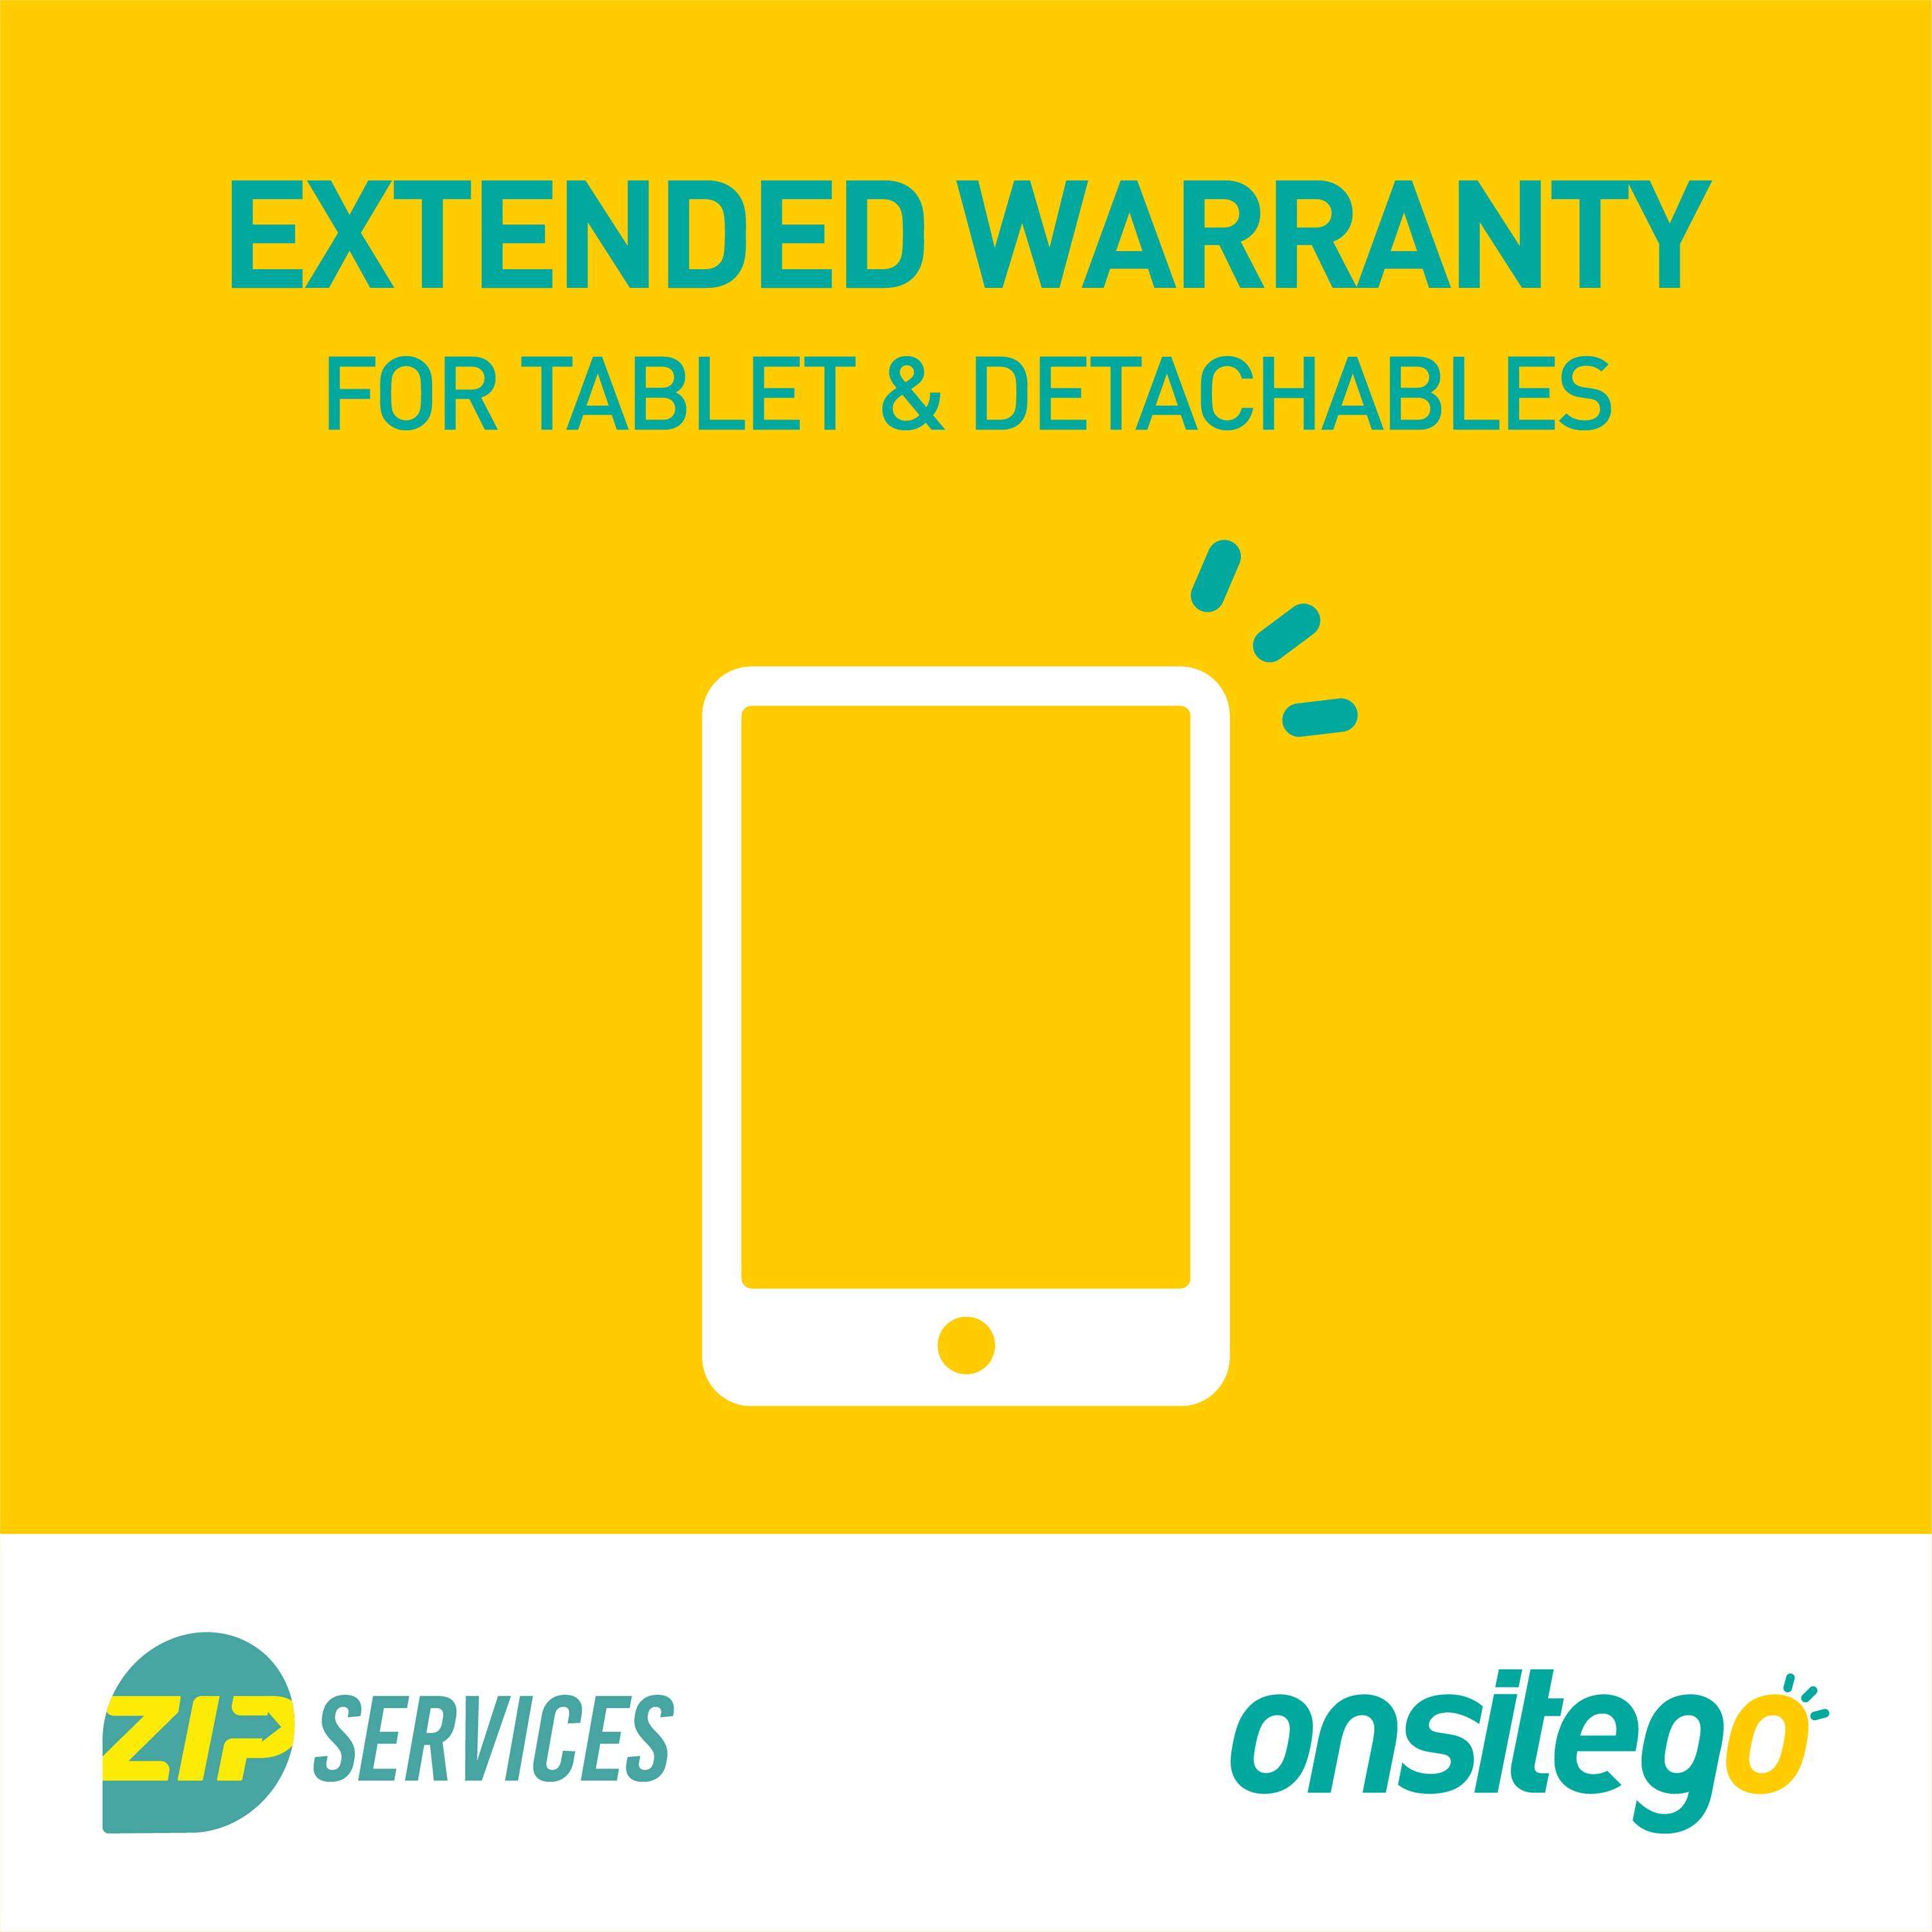 Onsitego 3 Months Extended Warranty for Tablets Rs.135001 - Rs.140000_1